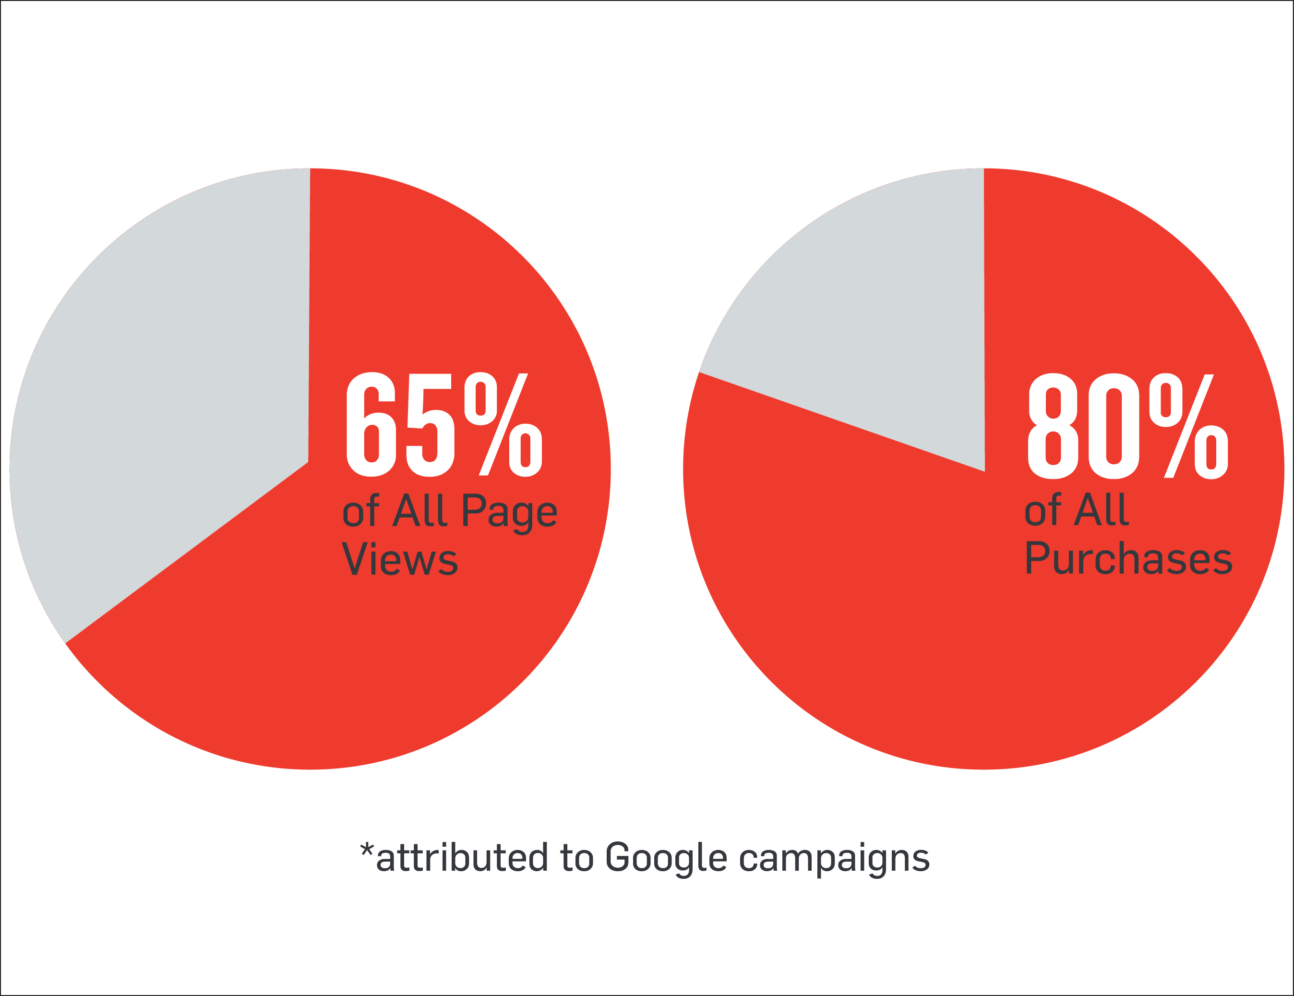 Pie charts showing 65% of all page views and 80% of all purchases attributed to Google campaigns